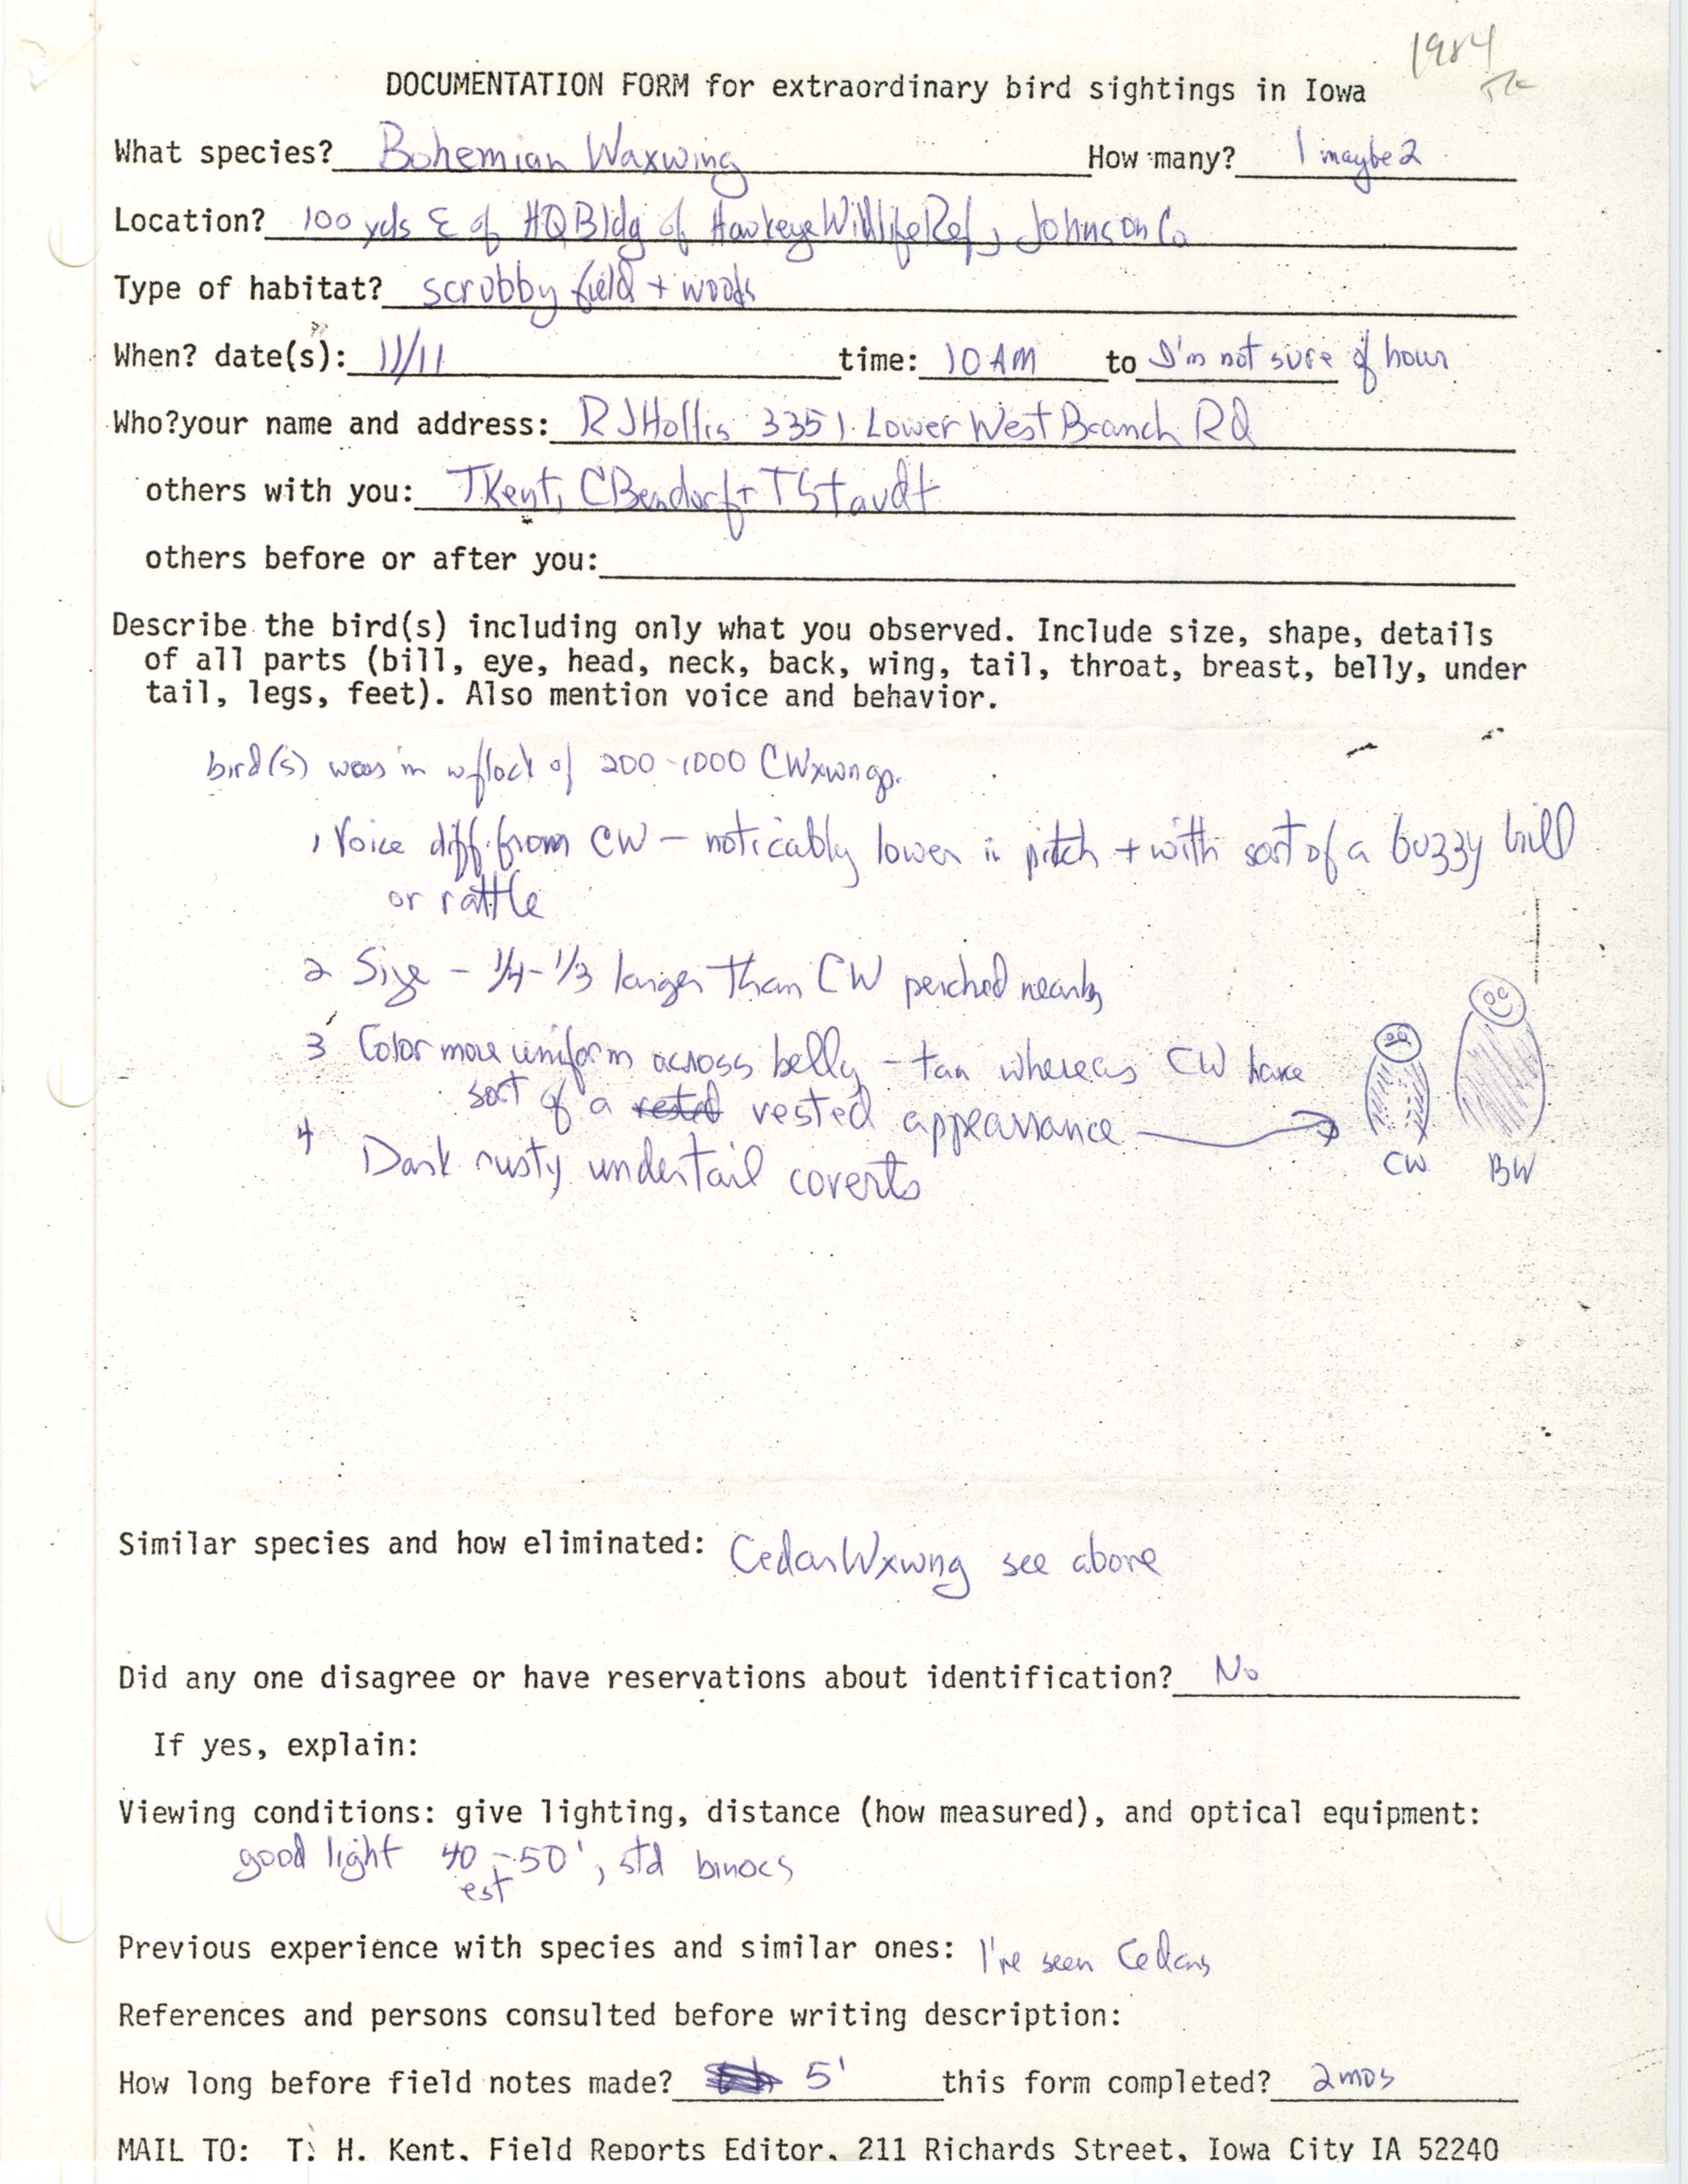 Rare bird documentation form for Bohemian Waxwing at Hawkeye Wildlife Management Area in 1984